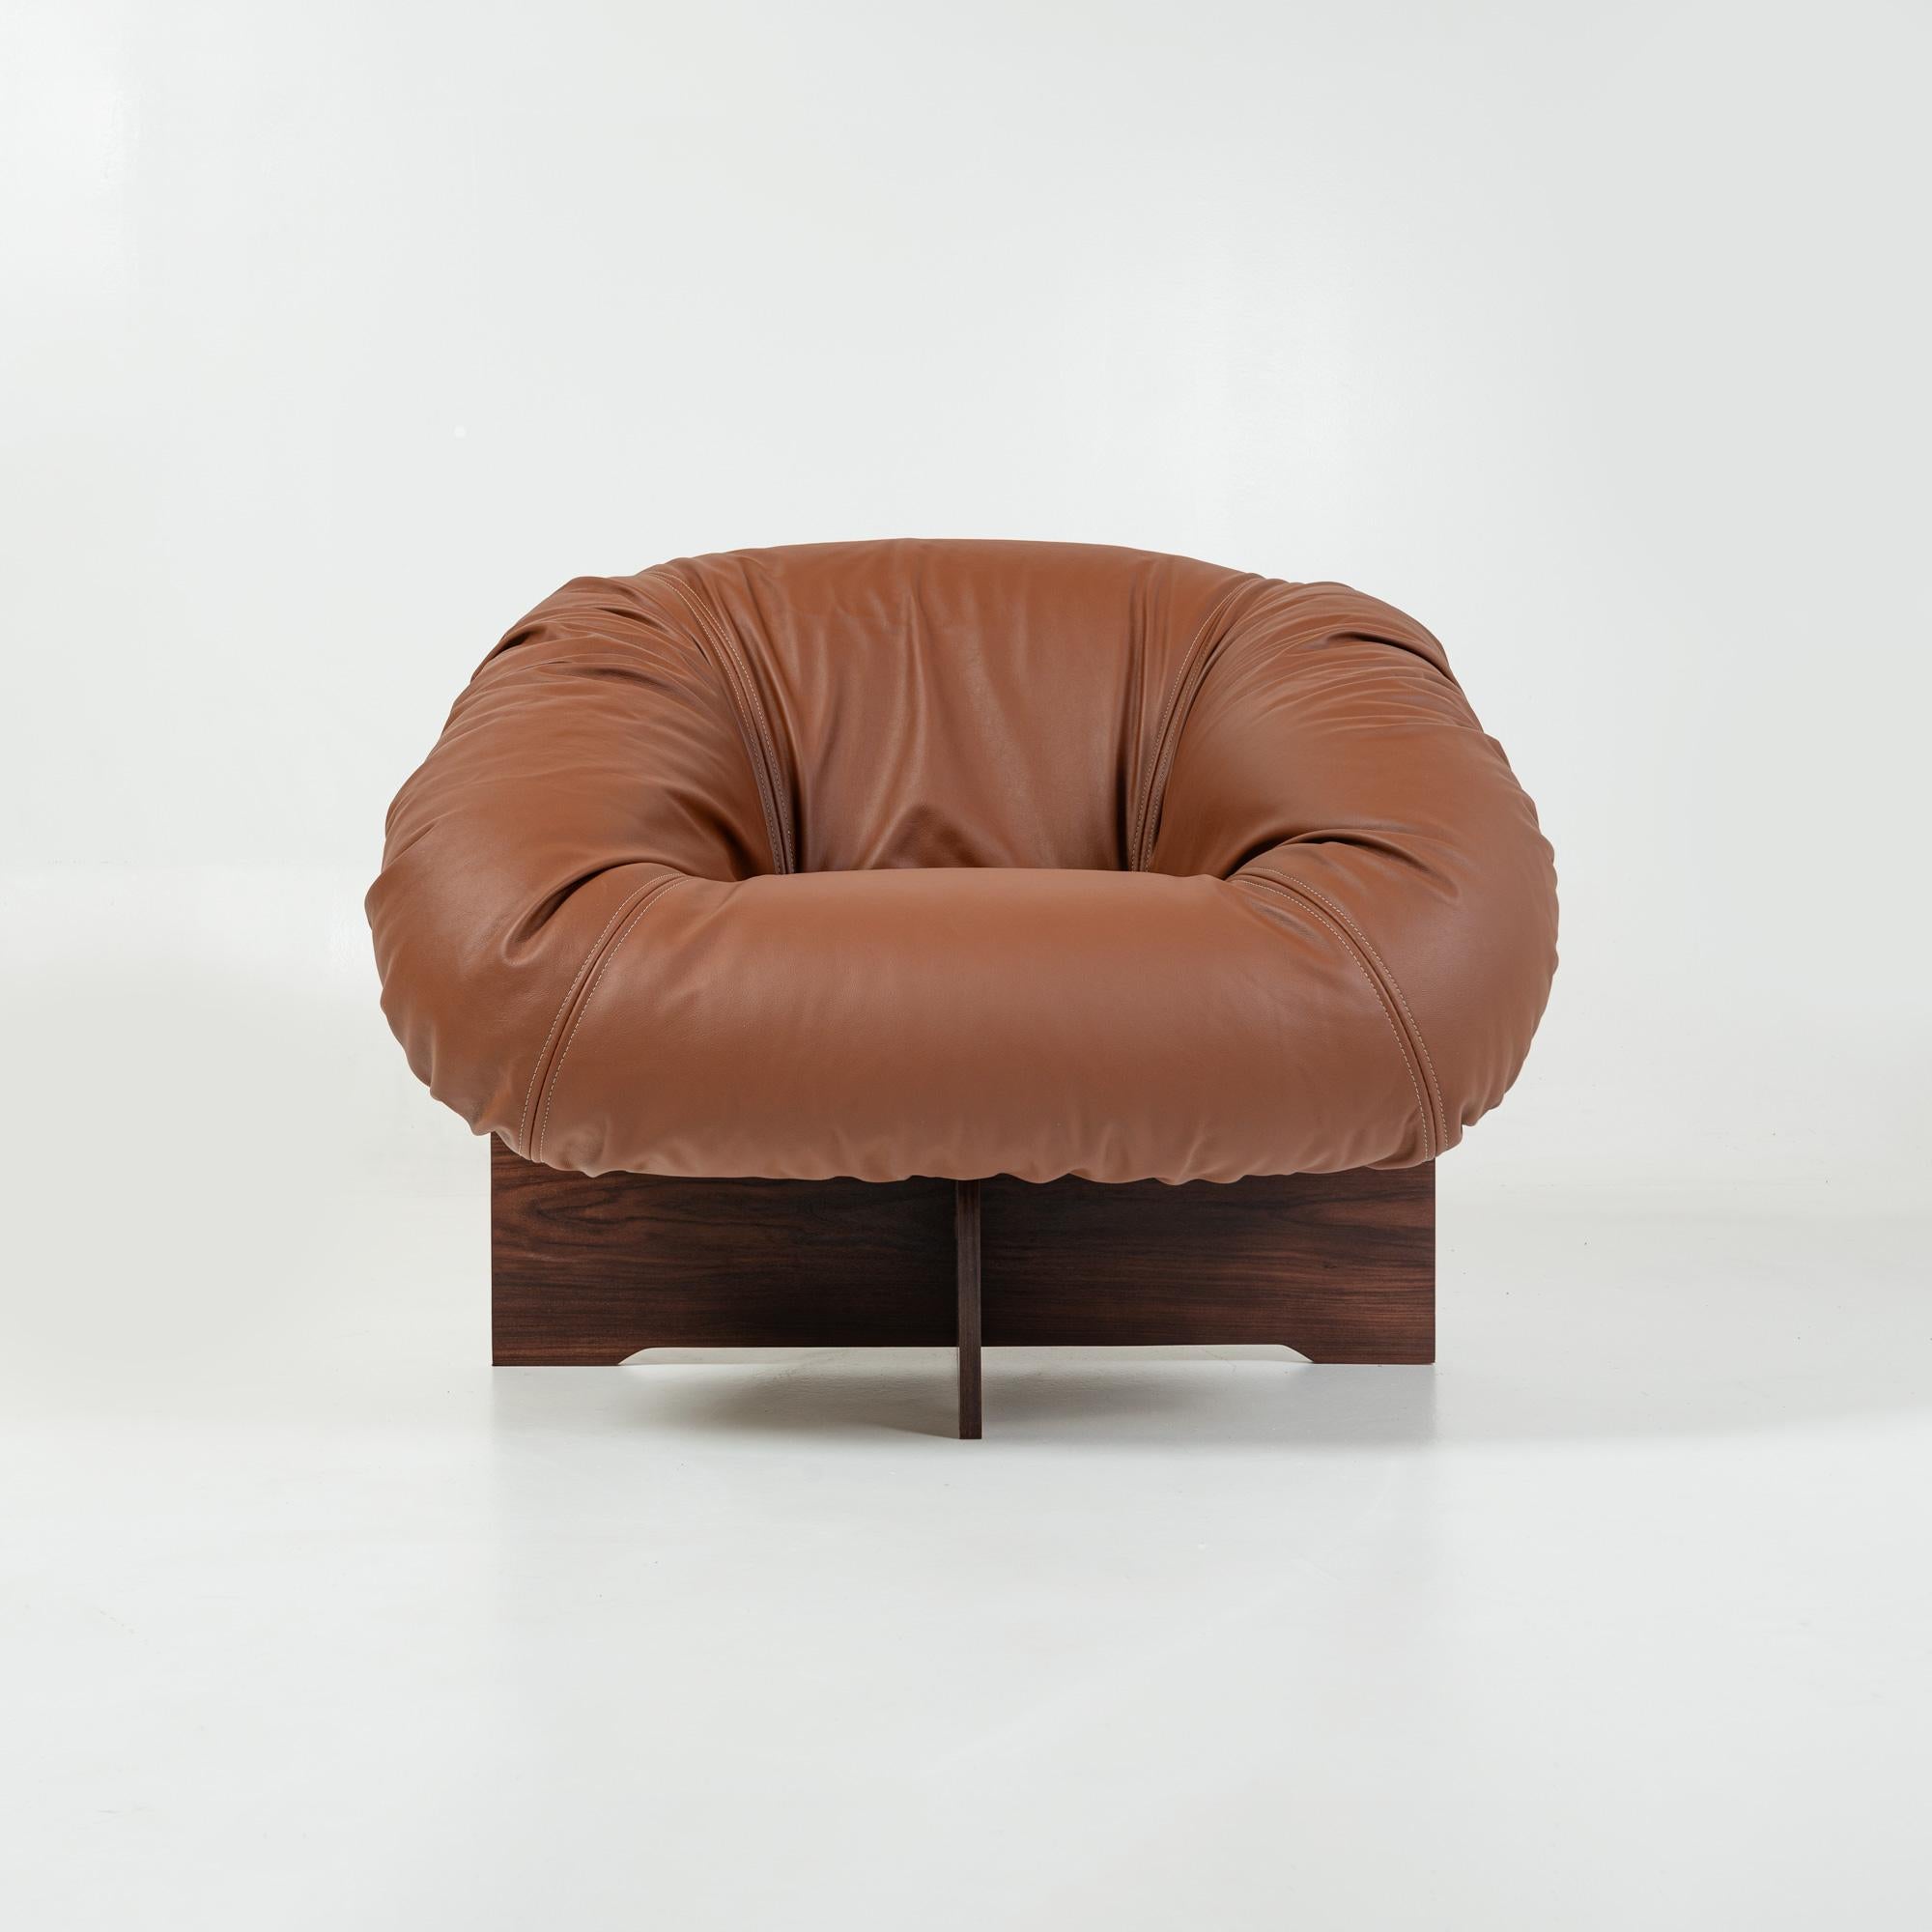 A rare lounge chair designed by Percival Lafer for Móveis Lafer, Model MP-61, with fiberglass shell, rosewood plywood base. Restored and reupholstered in Maharam Brown leather. In great restored condition, minor nicks on the base and the